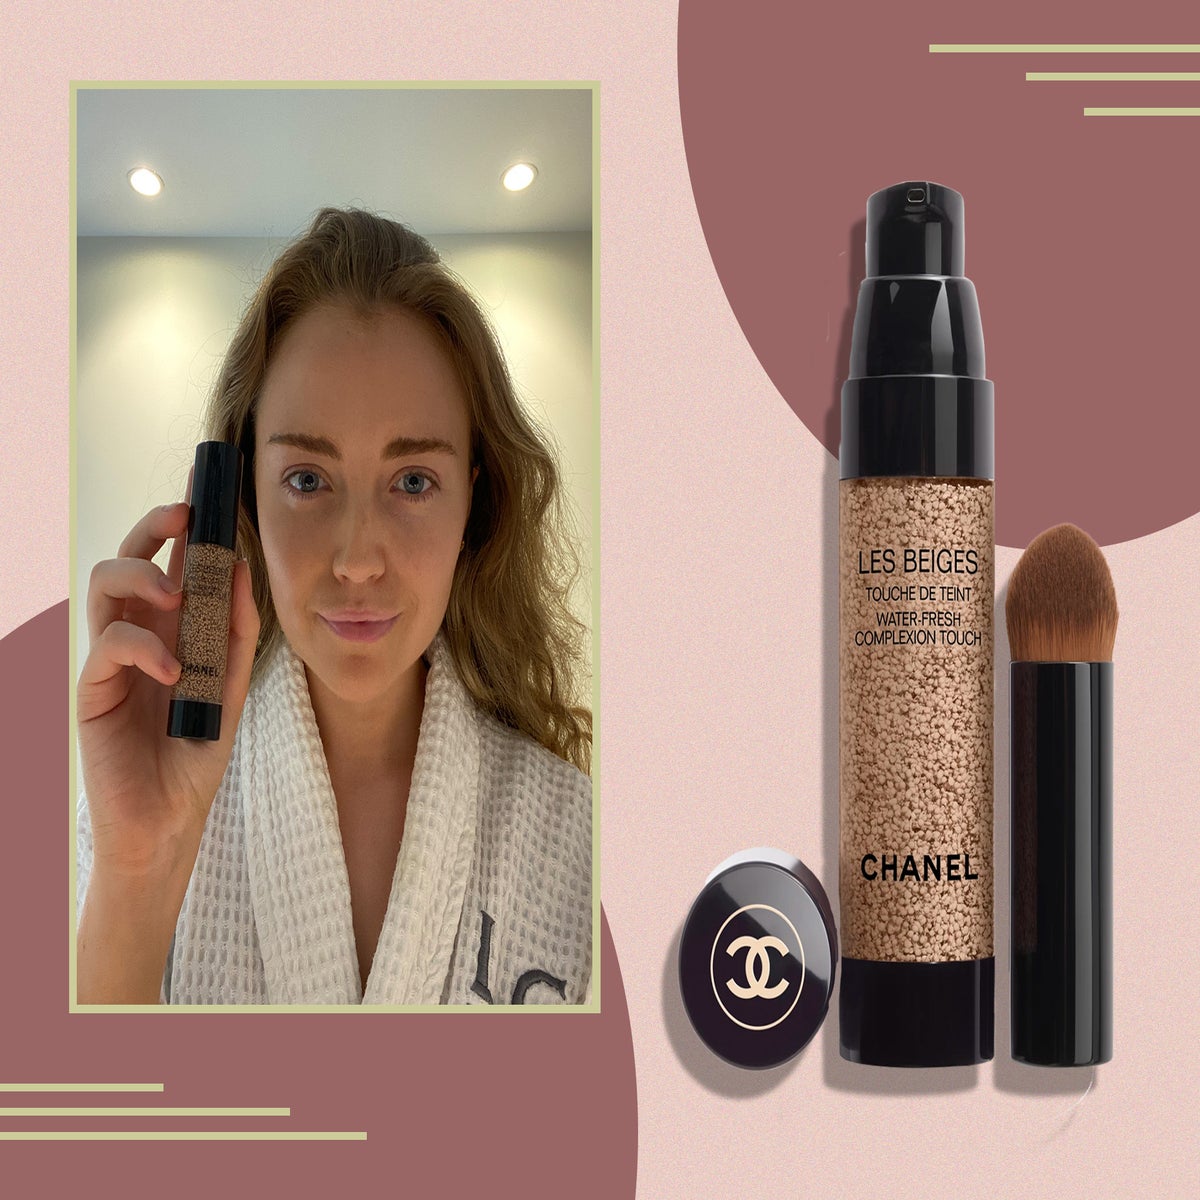 Chanel Les Beiges Water-Fresh Complexion Touch - Foundation with